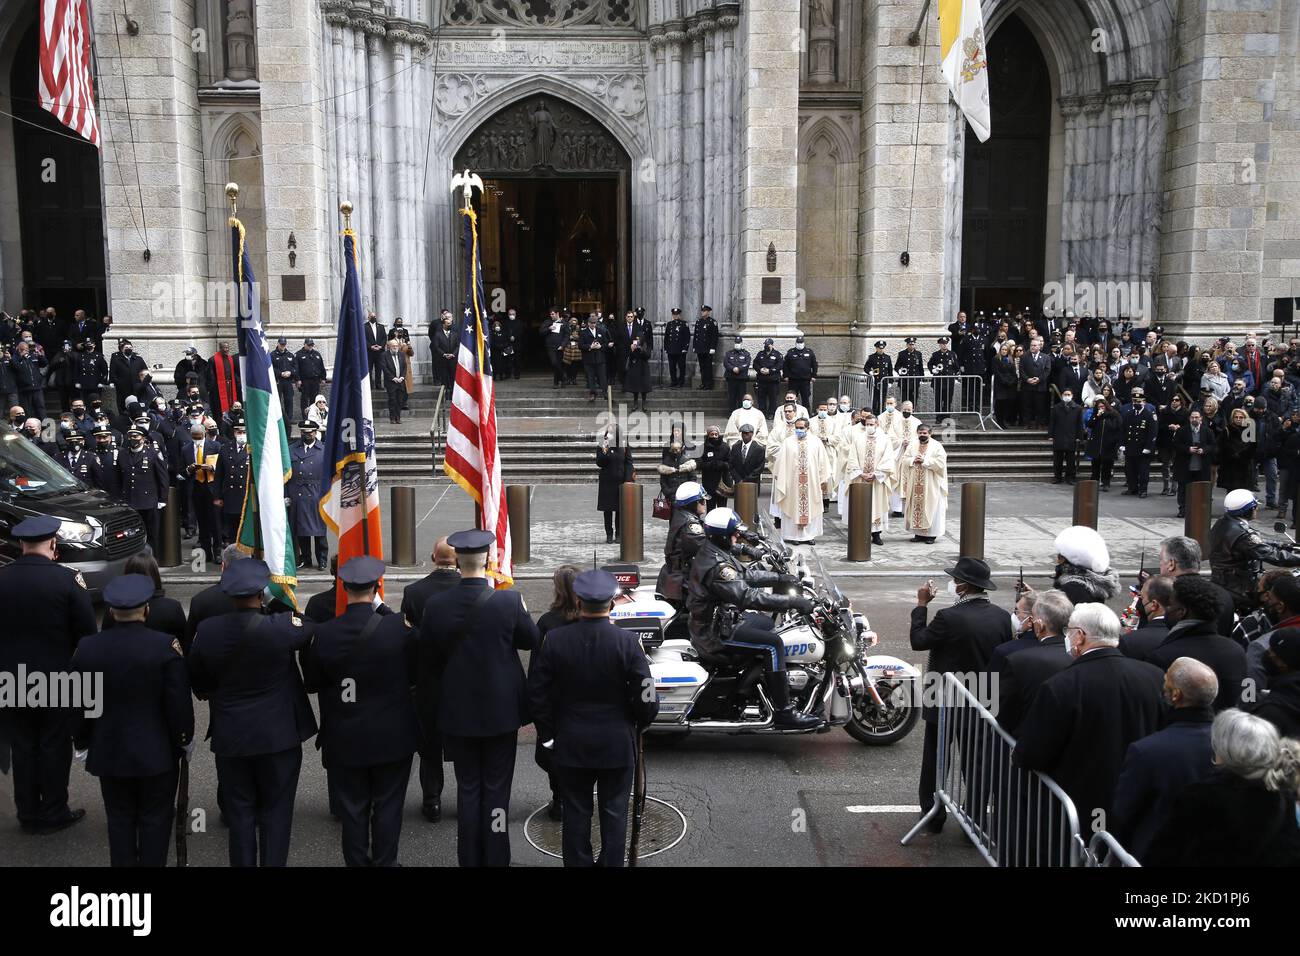 Hundredths of motorcycle officers start the funerary procession as thousands of police officers from various jurisdictions around the country attend the funeral for the slain NYPD Officer Wilbert Mora on February 2, 2022 in New York City, USA. The young officer was killed along with his partner Jason Rivera over week ago while responding to a domestic disturbance in Harlem. His partner Jason Rivera was laid to rest last week. (Photo by John Lamparski/NurPhoto) Stock Photo